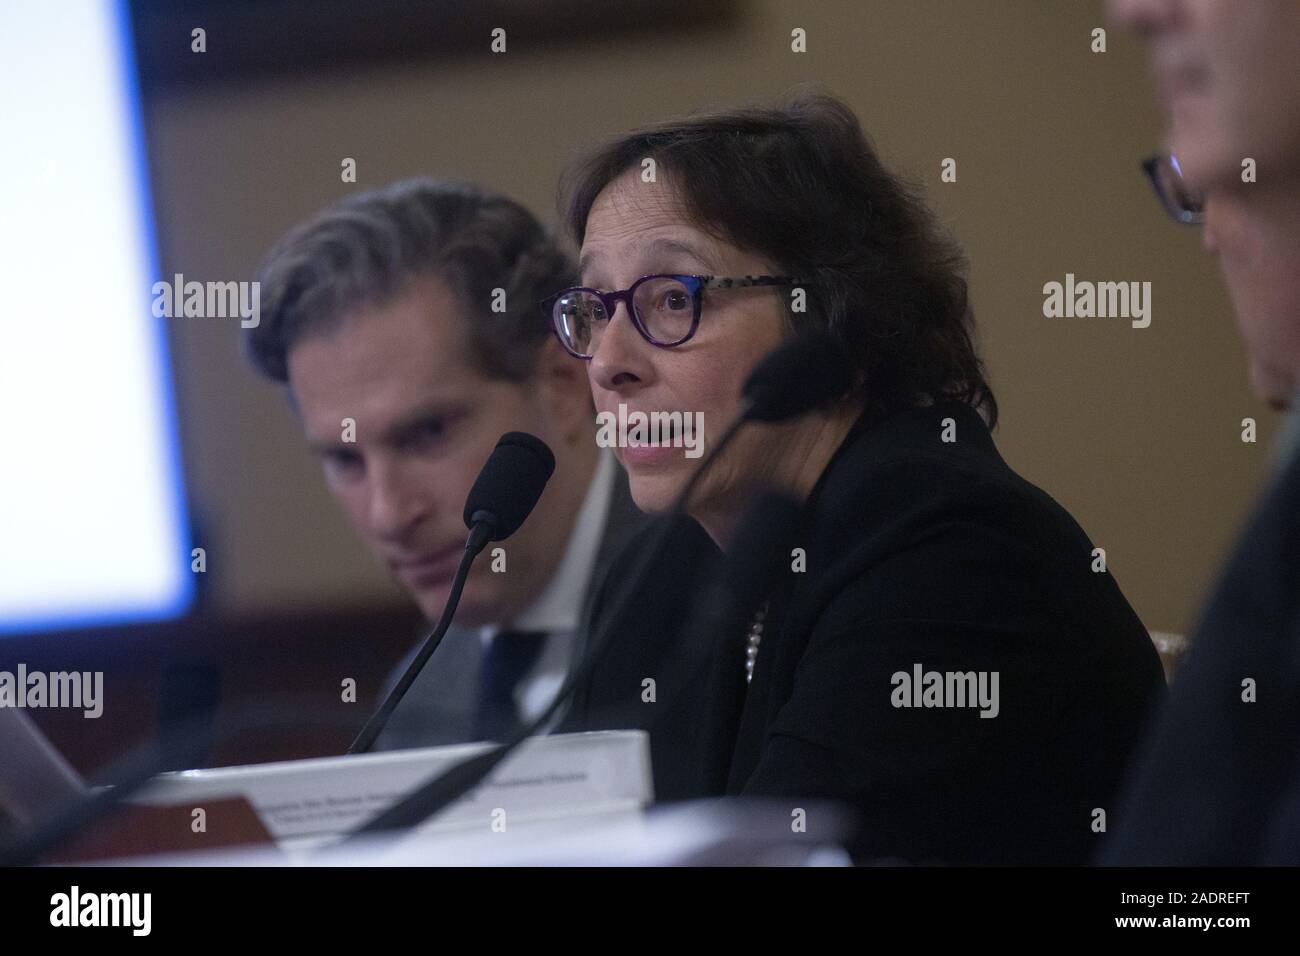 Washington, District of Columbia, USA. 4th Dec, 2019. Constitutional law expert Pamela Karlan, of Stanford University, along with Noah Feldman, of Harvard University, Michael Gerhardt, of the University of North Carolina, and Jonathan Turley of The George Washington University Law School, testifies before the United States House Committee on the Judiciary on Capitol Hill in Washington, DC, U.S. on Wednesday, December 4, 2019. Credit: Stefani Reynolds/CNP/ZUMA Wire/Alamy Live News Stock Photo